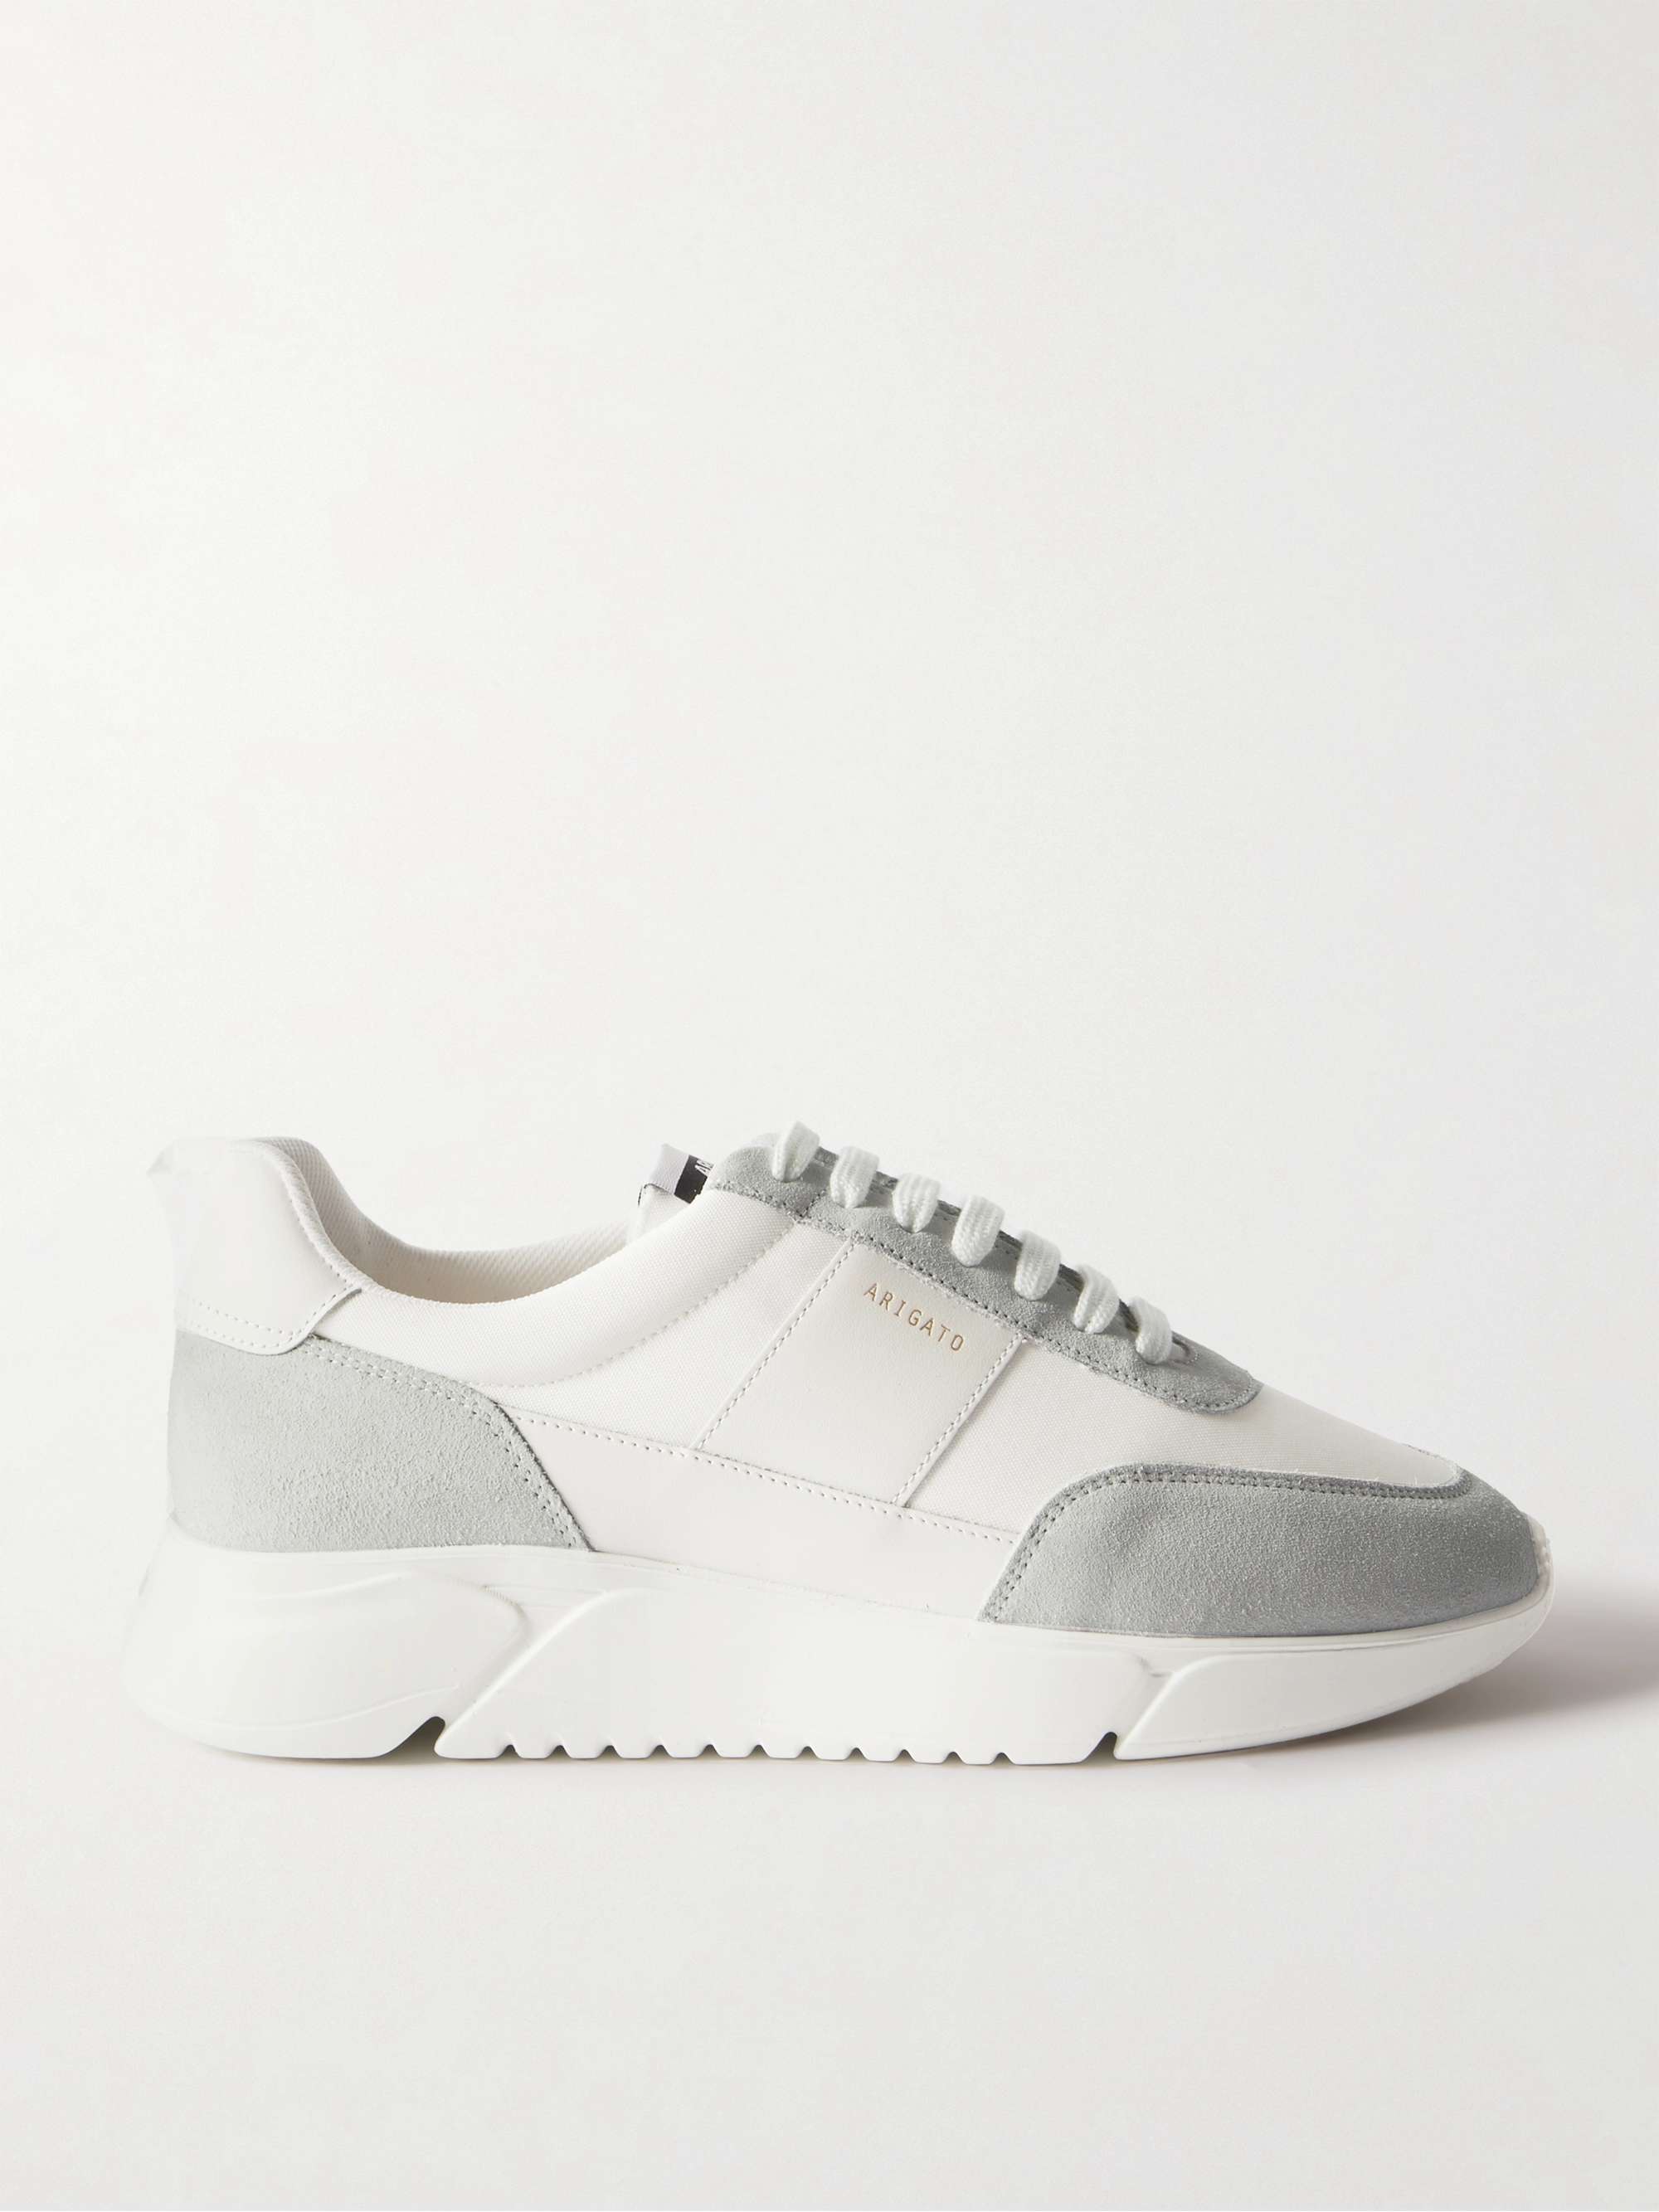 AXEL ARIGATO Genesis Vintage Runner Leather, Mesh and Suede Sneakers | MR  PORTER